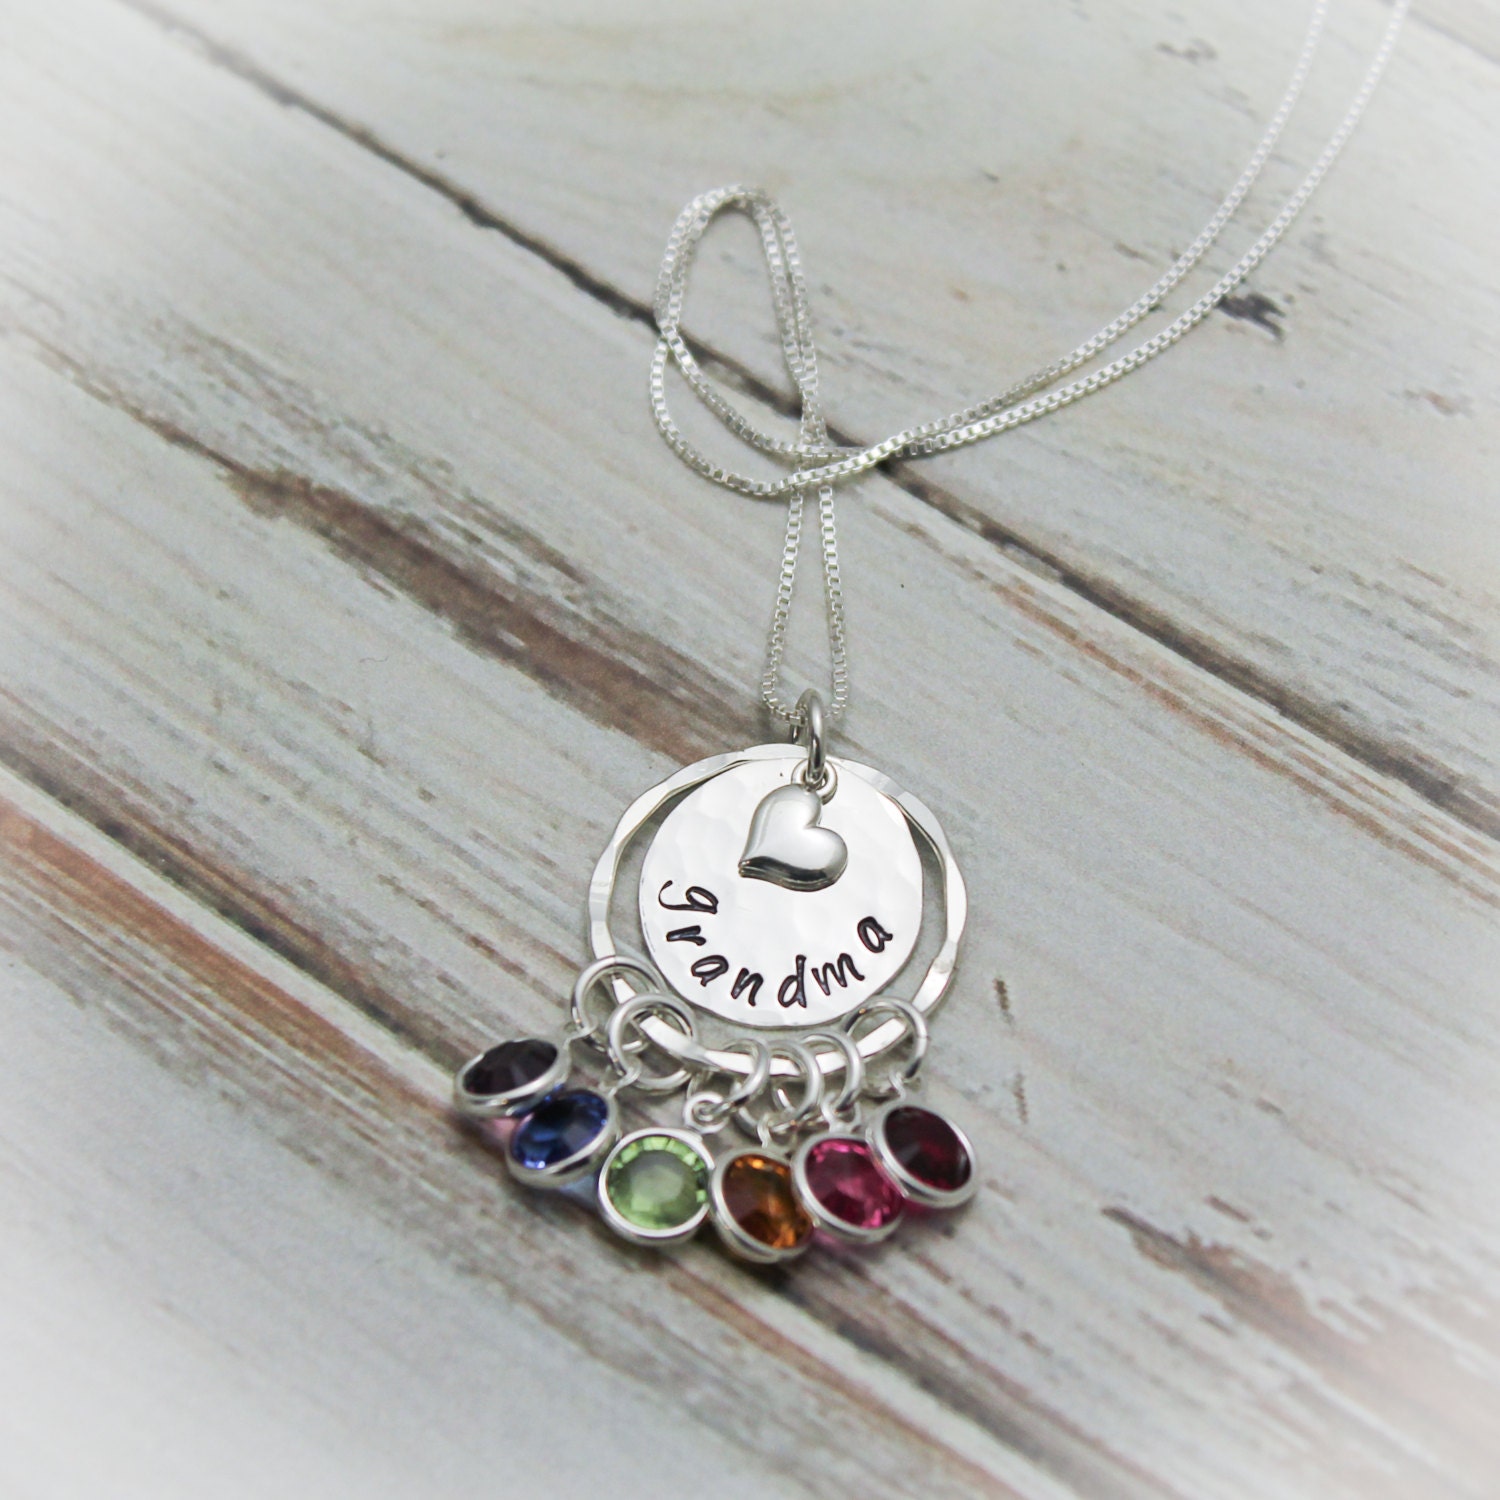 Grandmother Birthstone Necklace, Mom Mom Necklace, Birthstone Necklace, Grandchildren Necklace, Hand Stamped Personalized, Sterling Silver